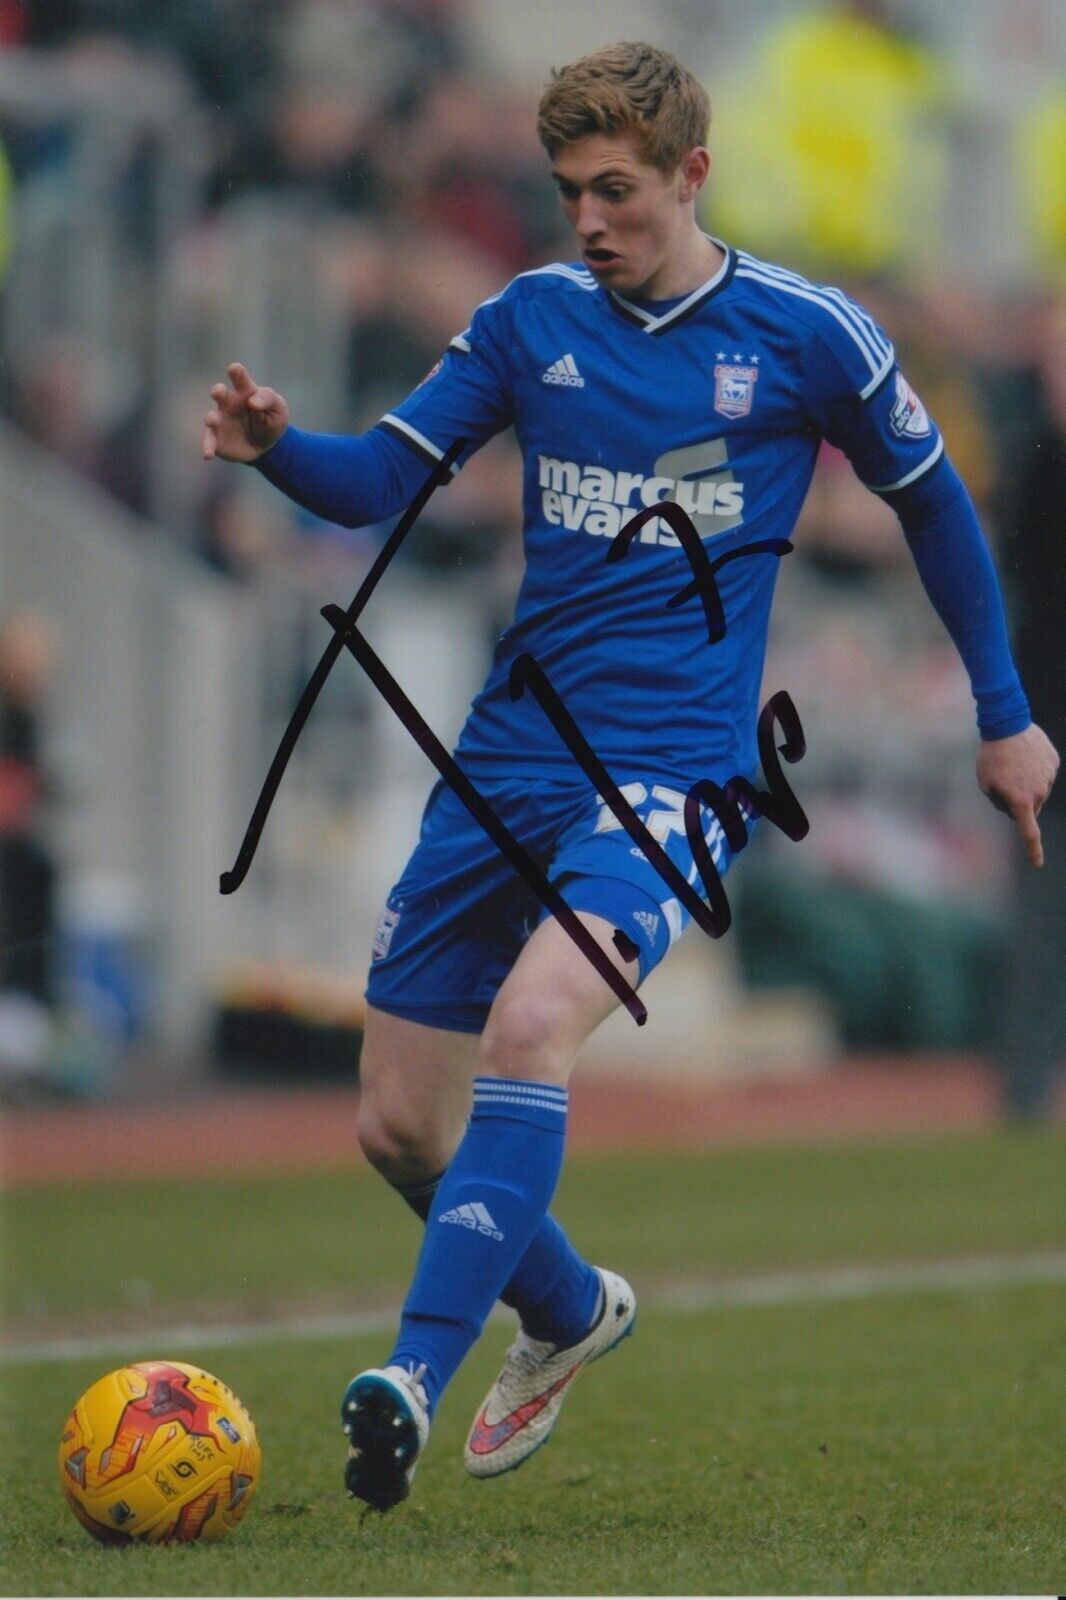 TEDDY BISHOP HAND SIGNED 6X4 Photo Poster painting - FOOTBALL AUTOGRAPH - IPSWICH TOWN 1.